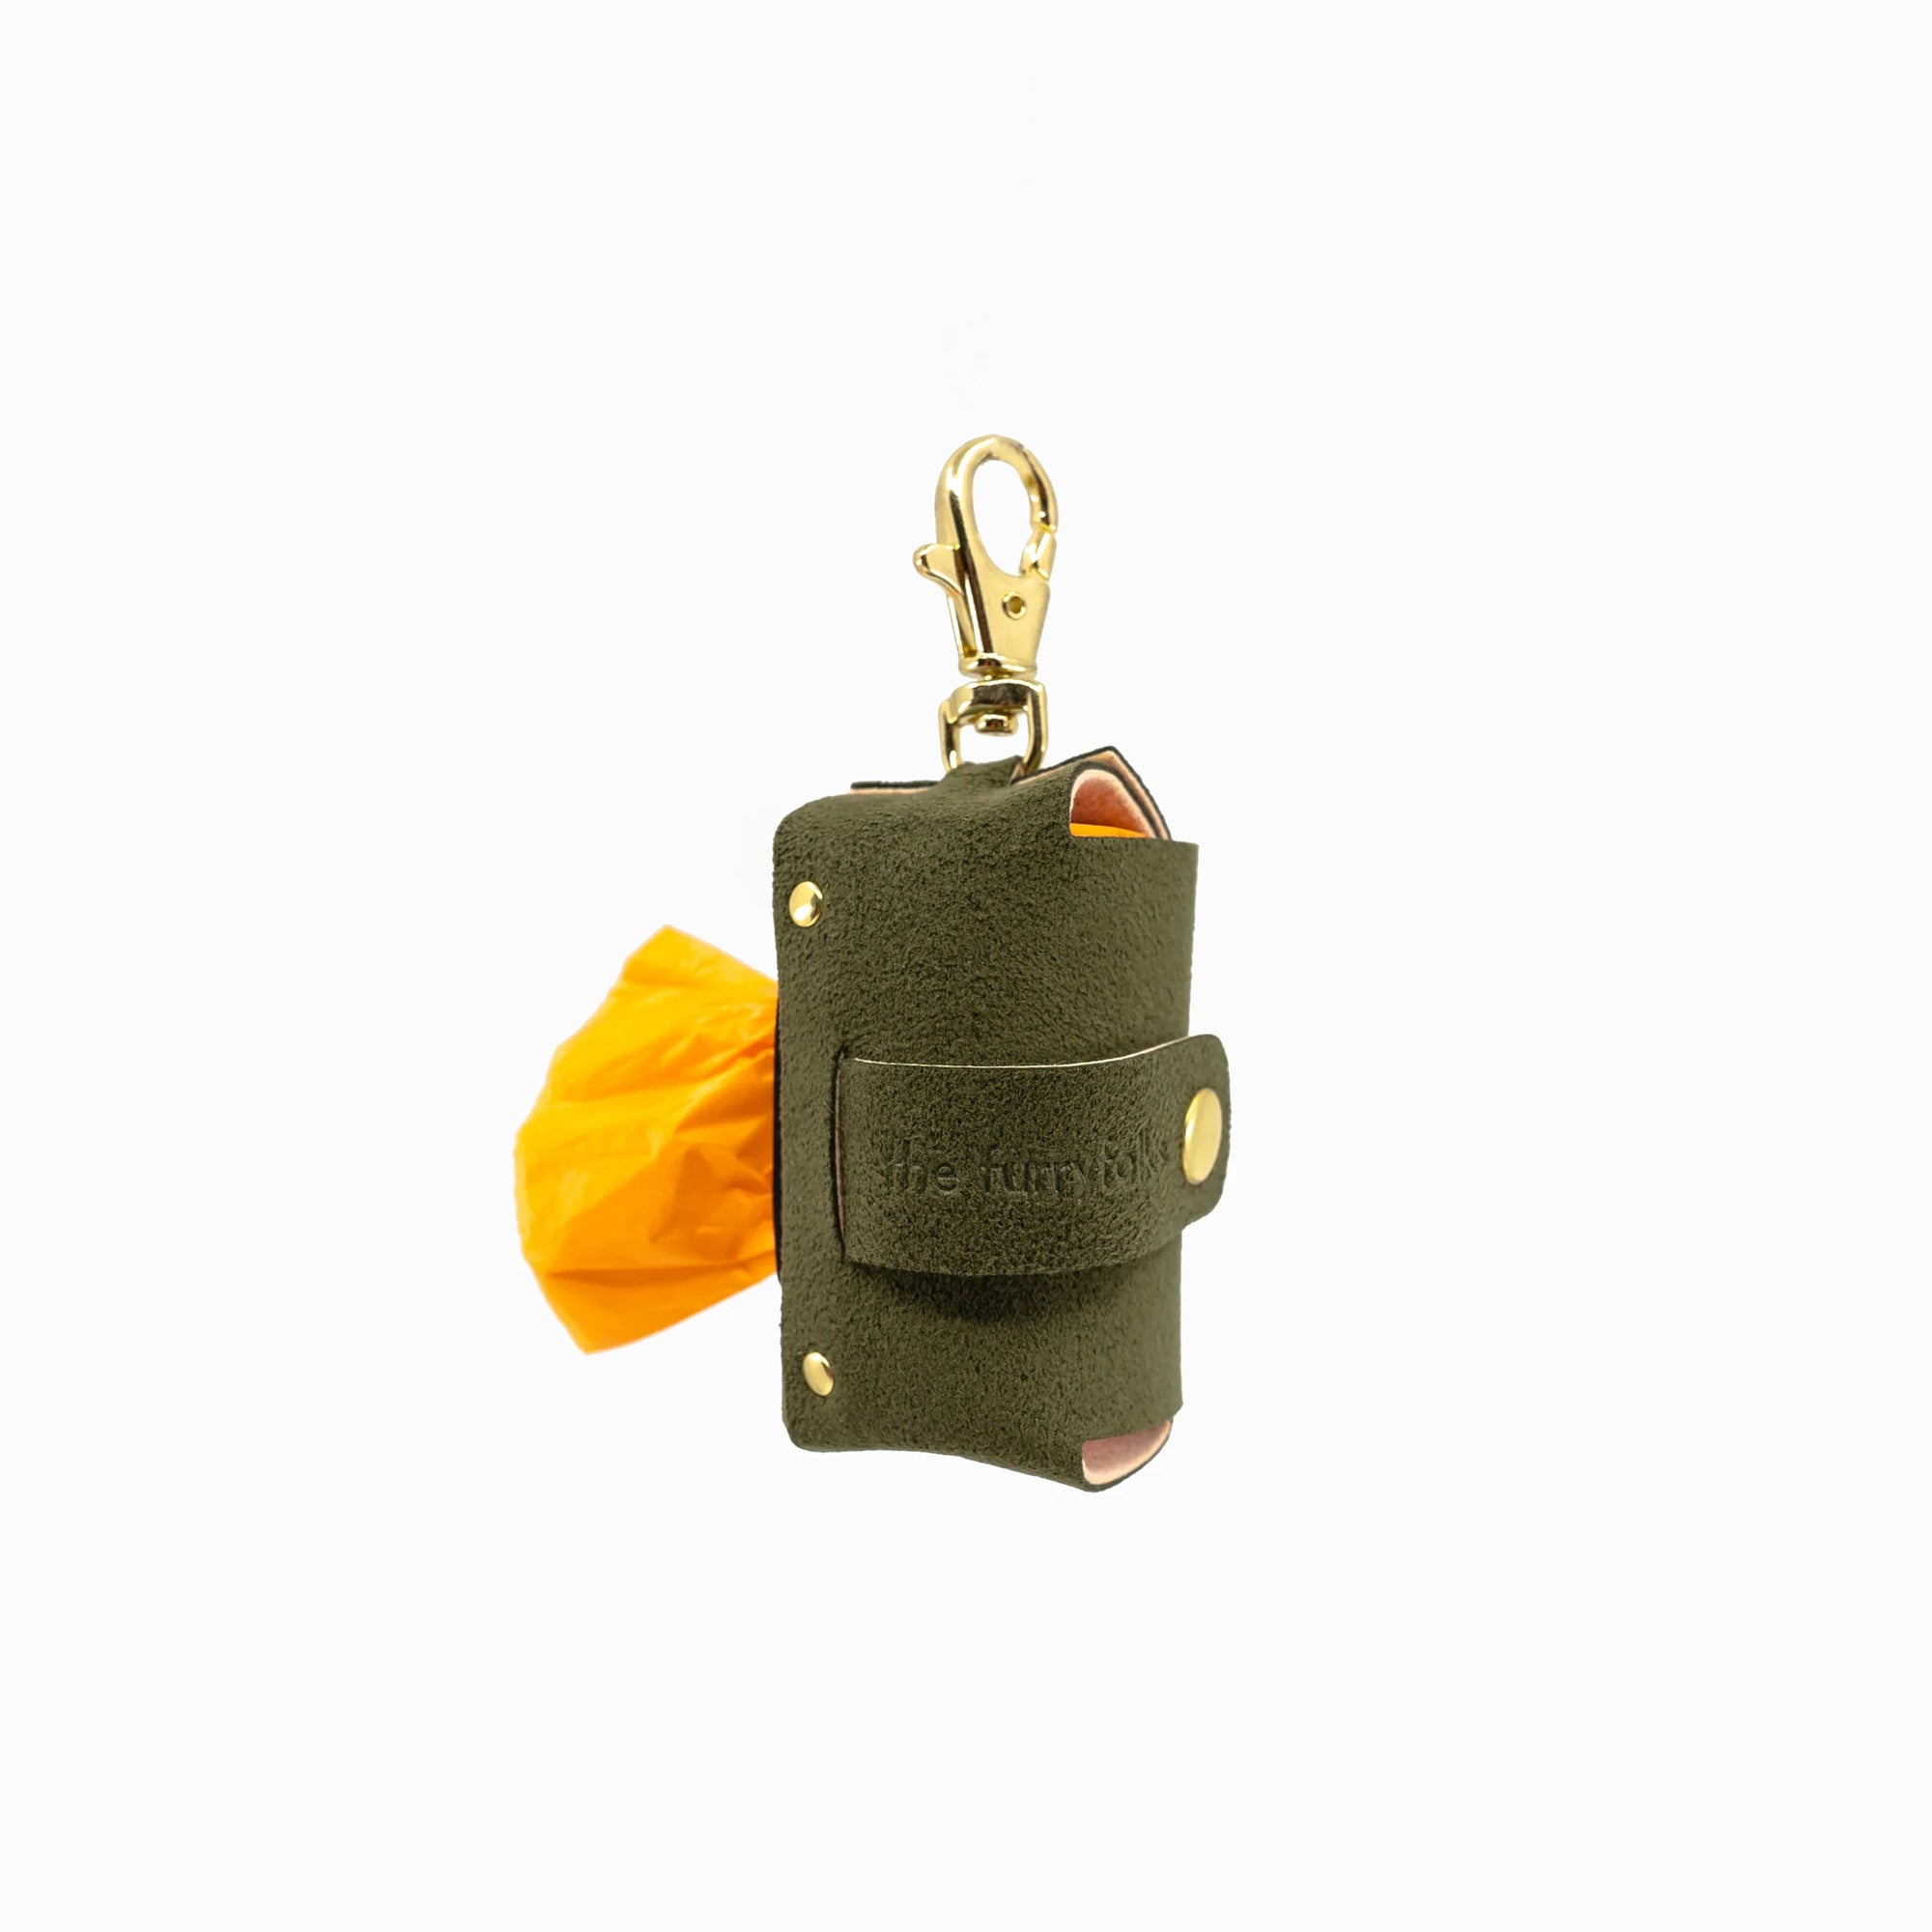 The photo shows an olive green dog poop bag holder marked with "the furryfolks" brand, featuring a gold clip and a roll of yellow bags. It's a practical accessory for pet owners to handle waste during walks.